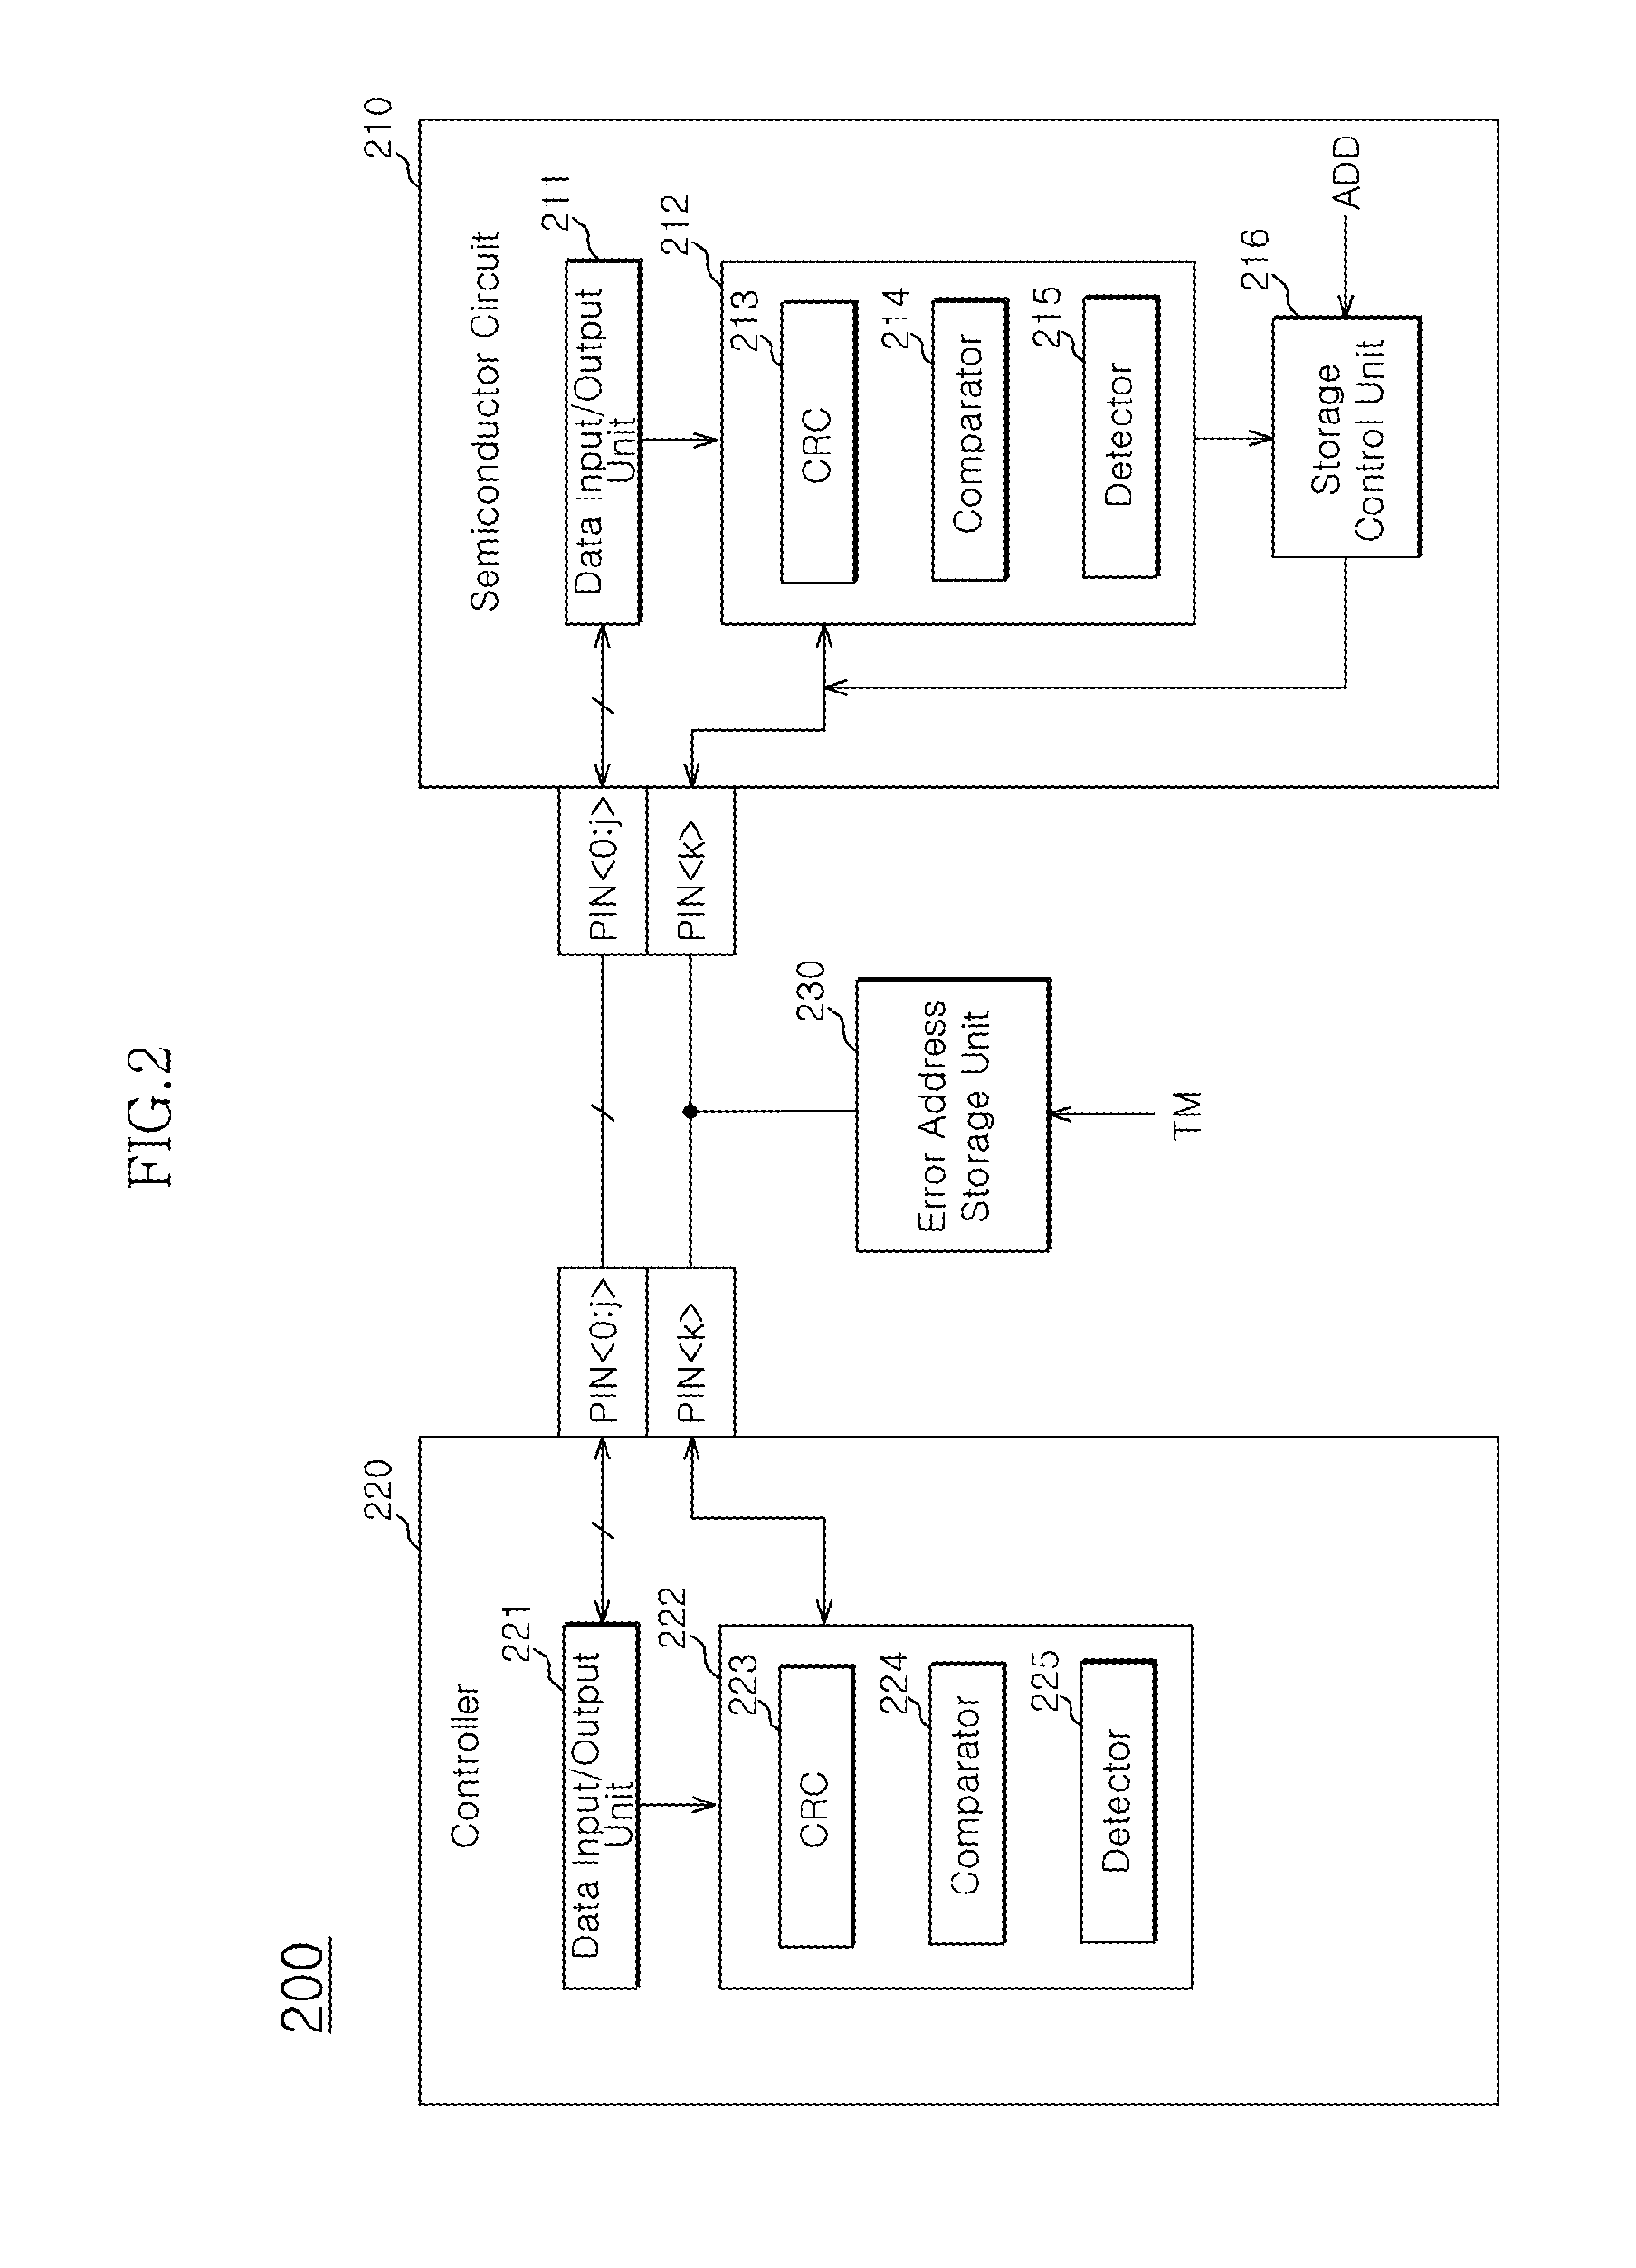 Semiconductor system